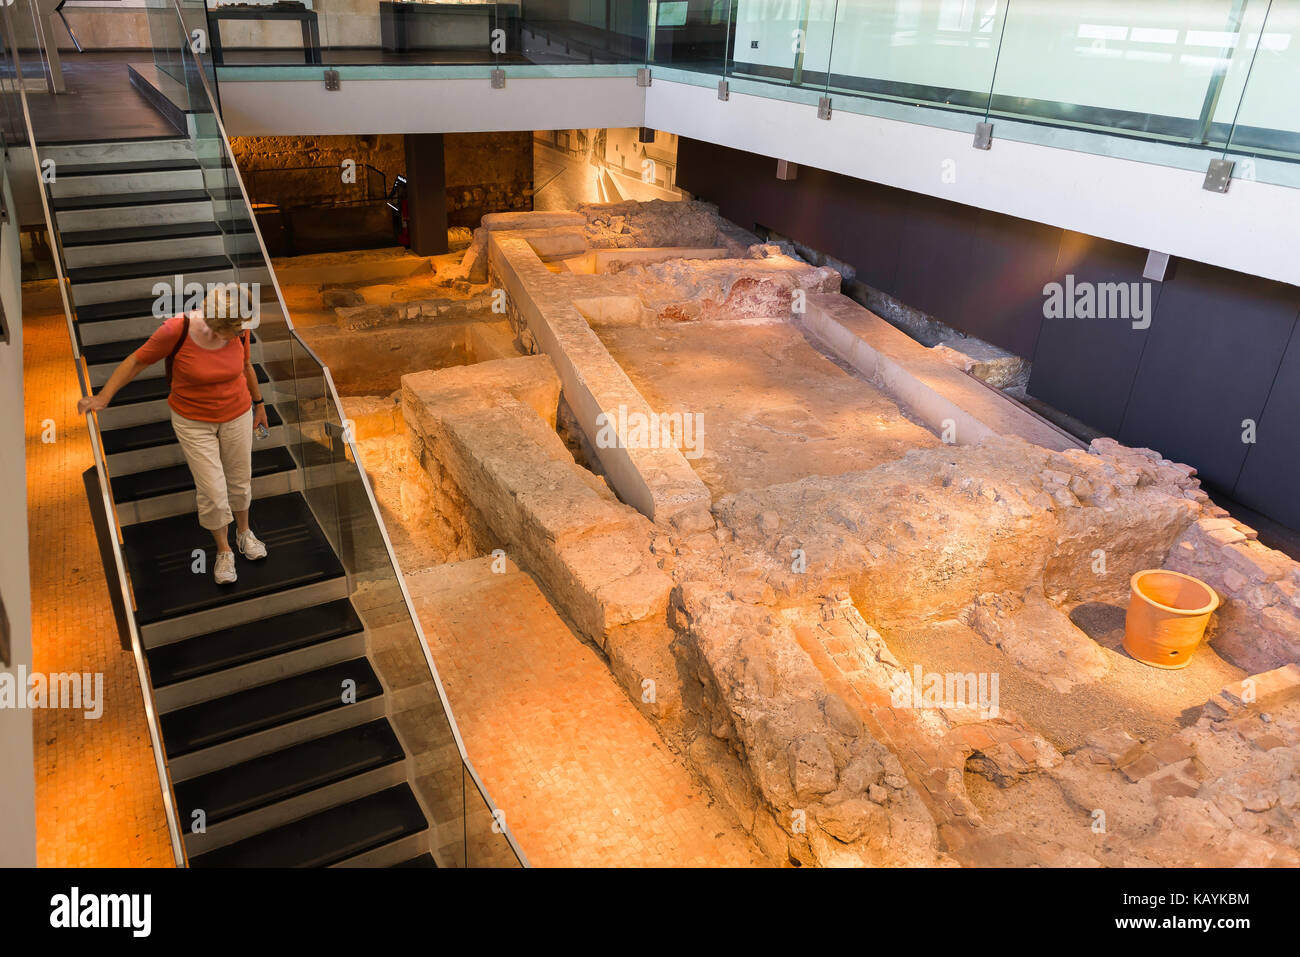 Valencia Spain L'Almoina, a visitor to the Almoina archaeological museum in Valencia descends below ground level to view excavated Roman buildings. Stock Photo